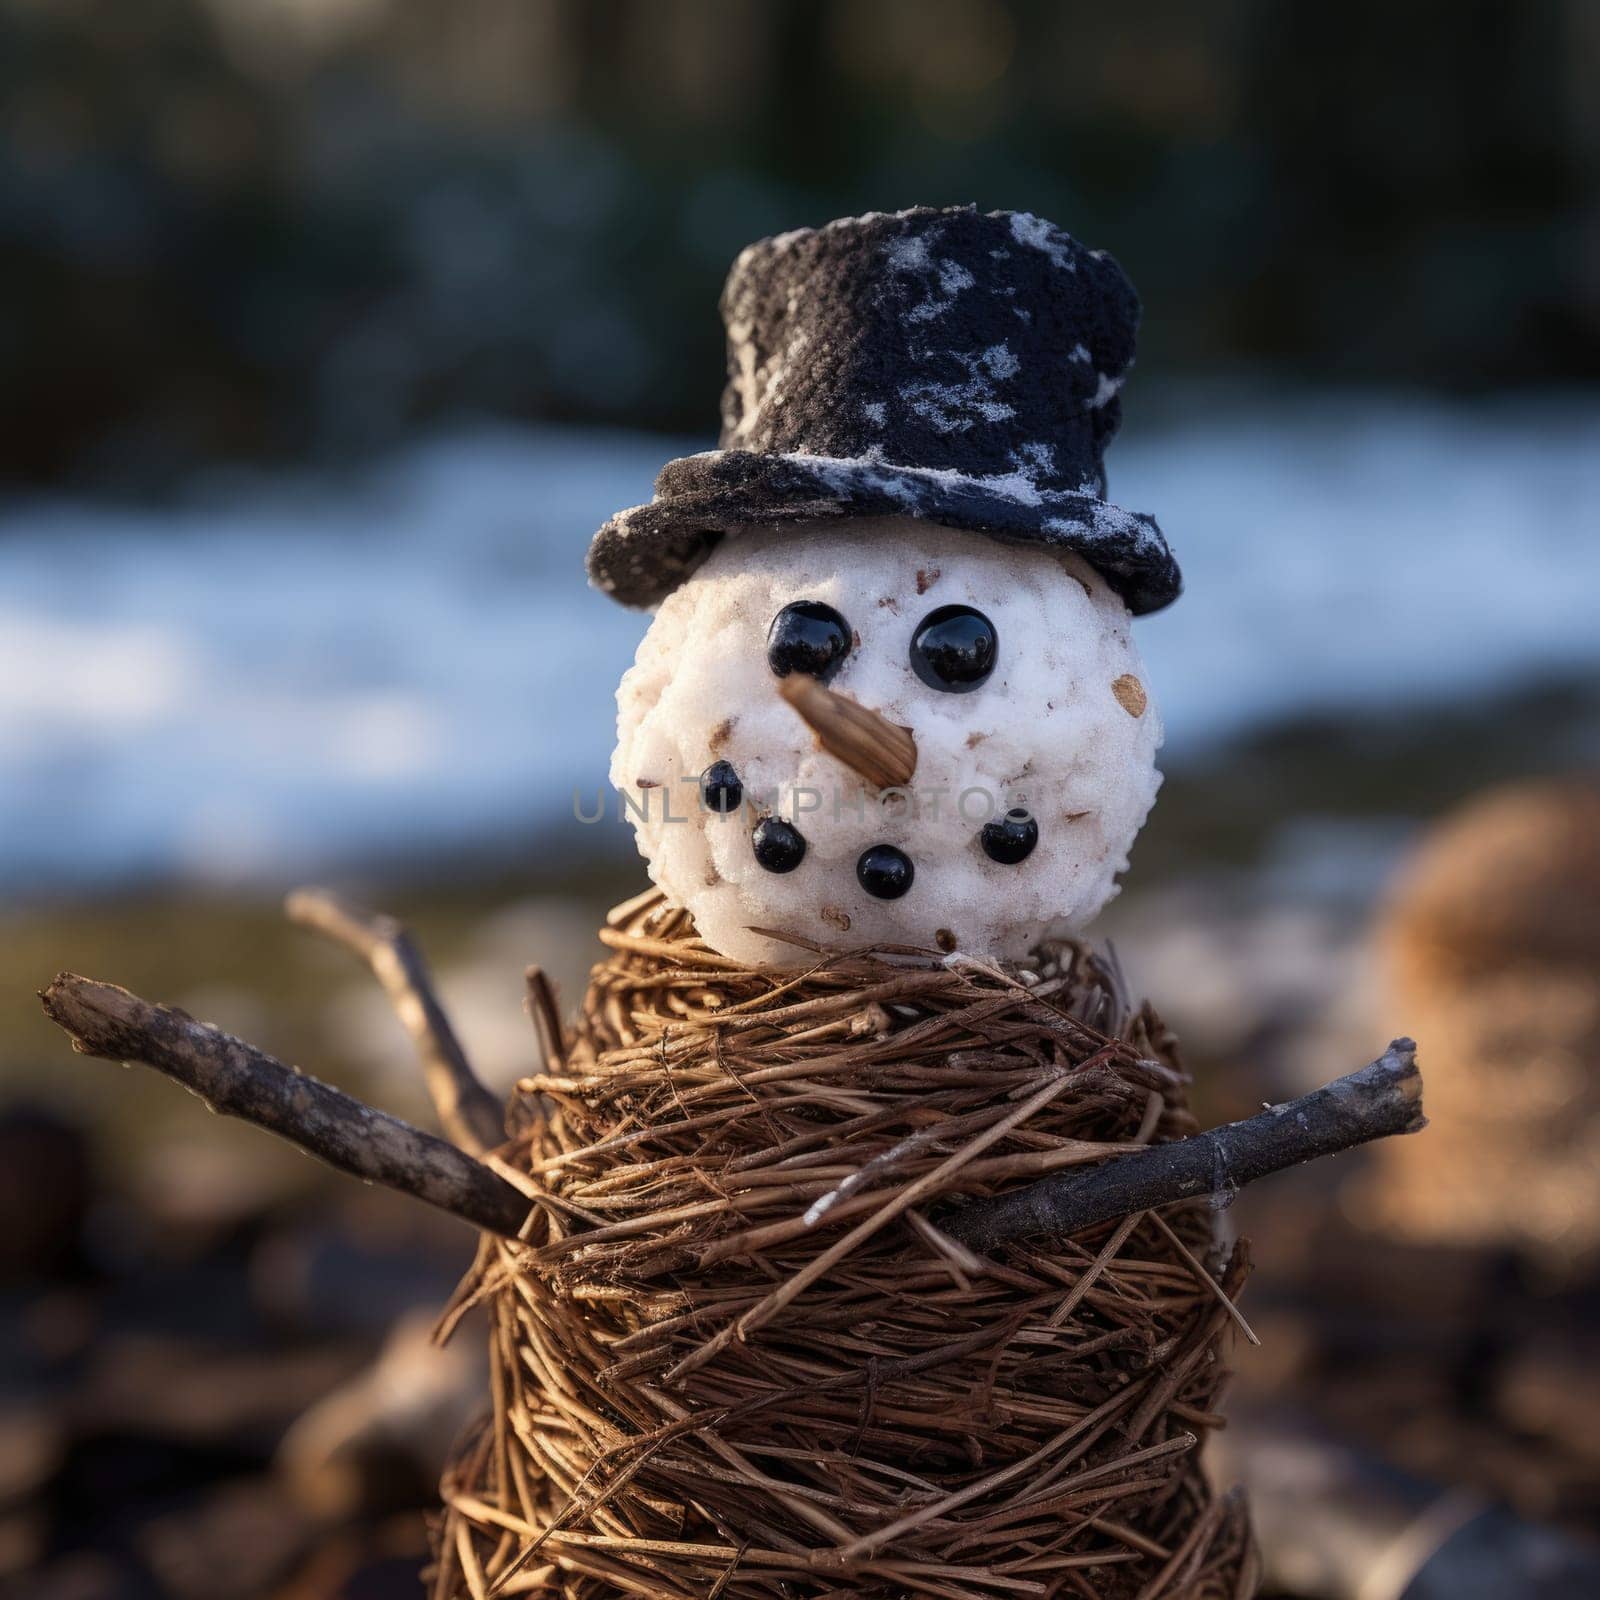 A snowman made out of rice and twigs, AI by starush